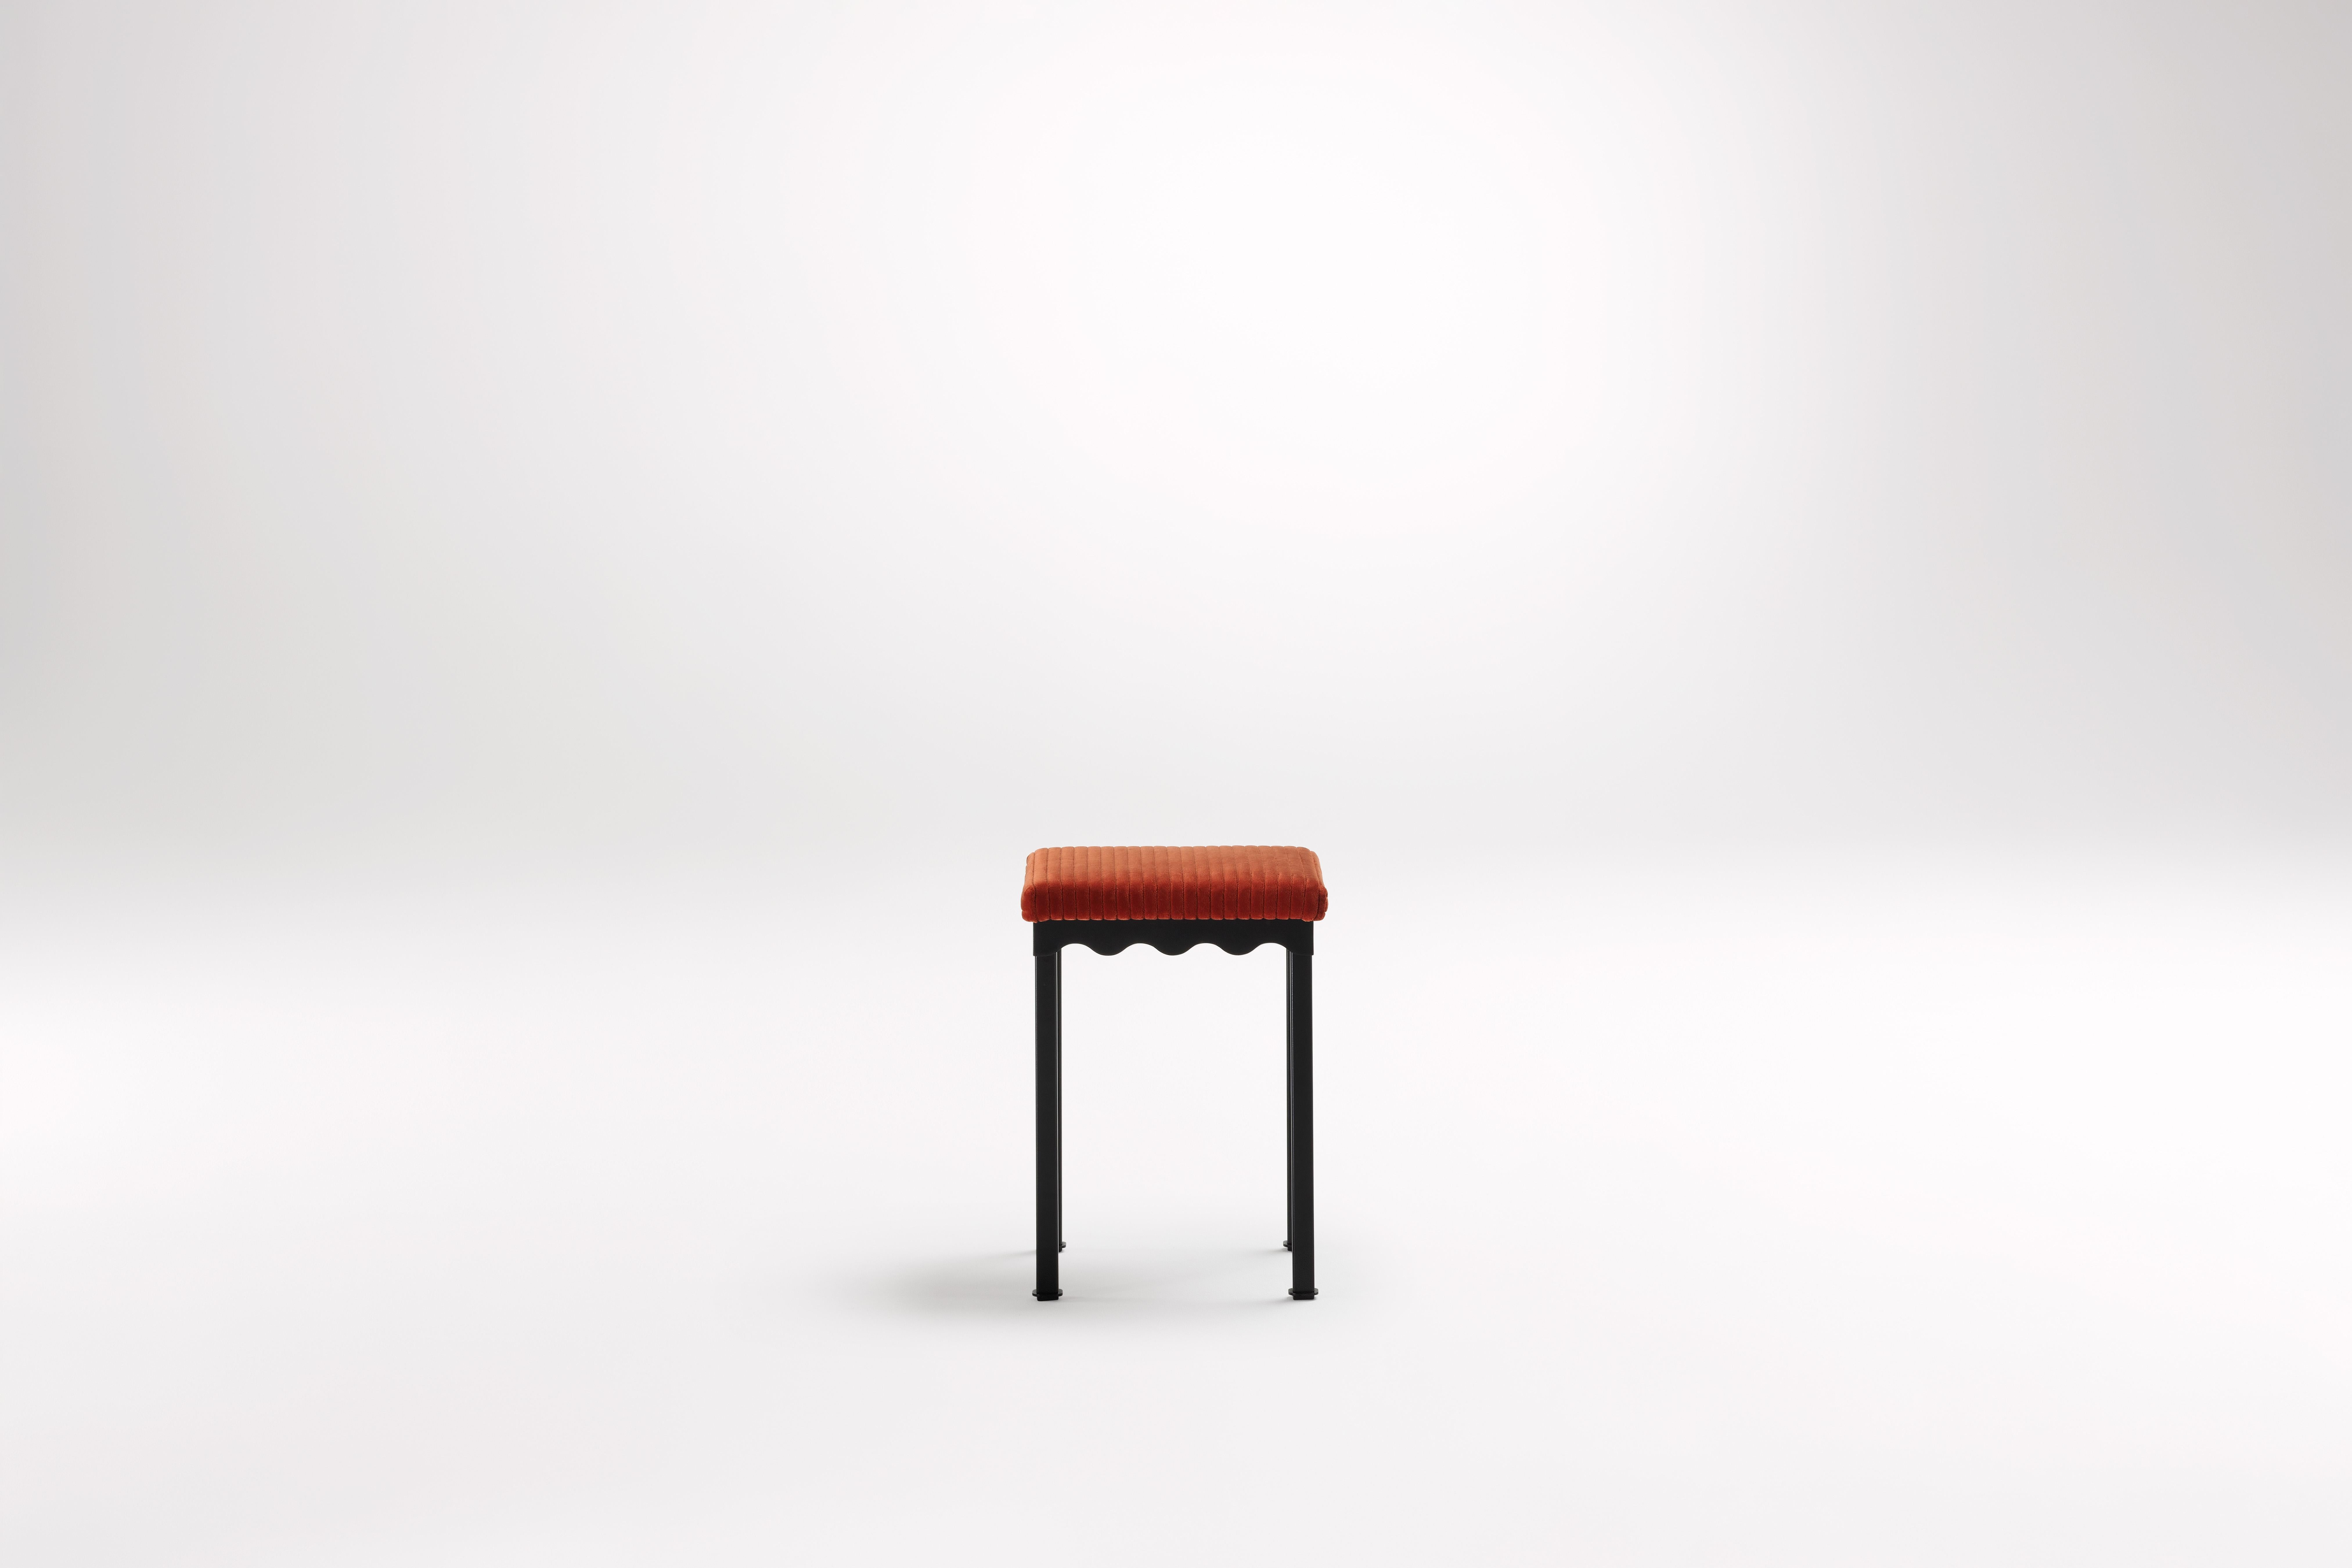 Sanguine Bellini Low Stool by Coco Flip
Dimensions: D 34 x W 34 x H 45 cm
Materials: Timber / Stone tops, Powder-coated steel frame. 
Weight: 5 kg
Frame Finishes: Textura Black.

Coco Flip is a Melbourne based furniture and lighting design studio,